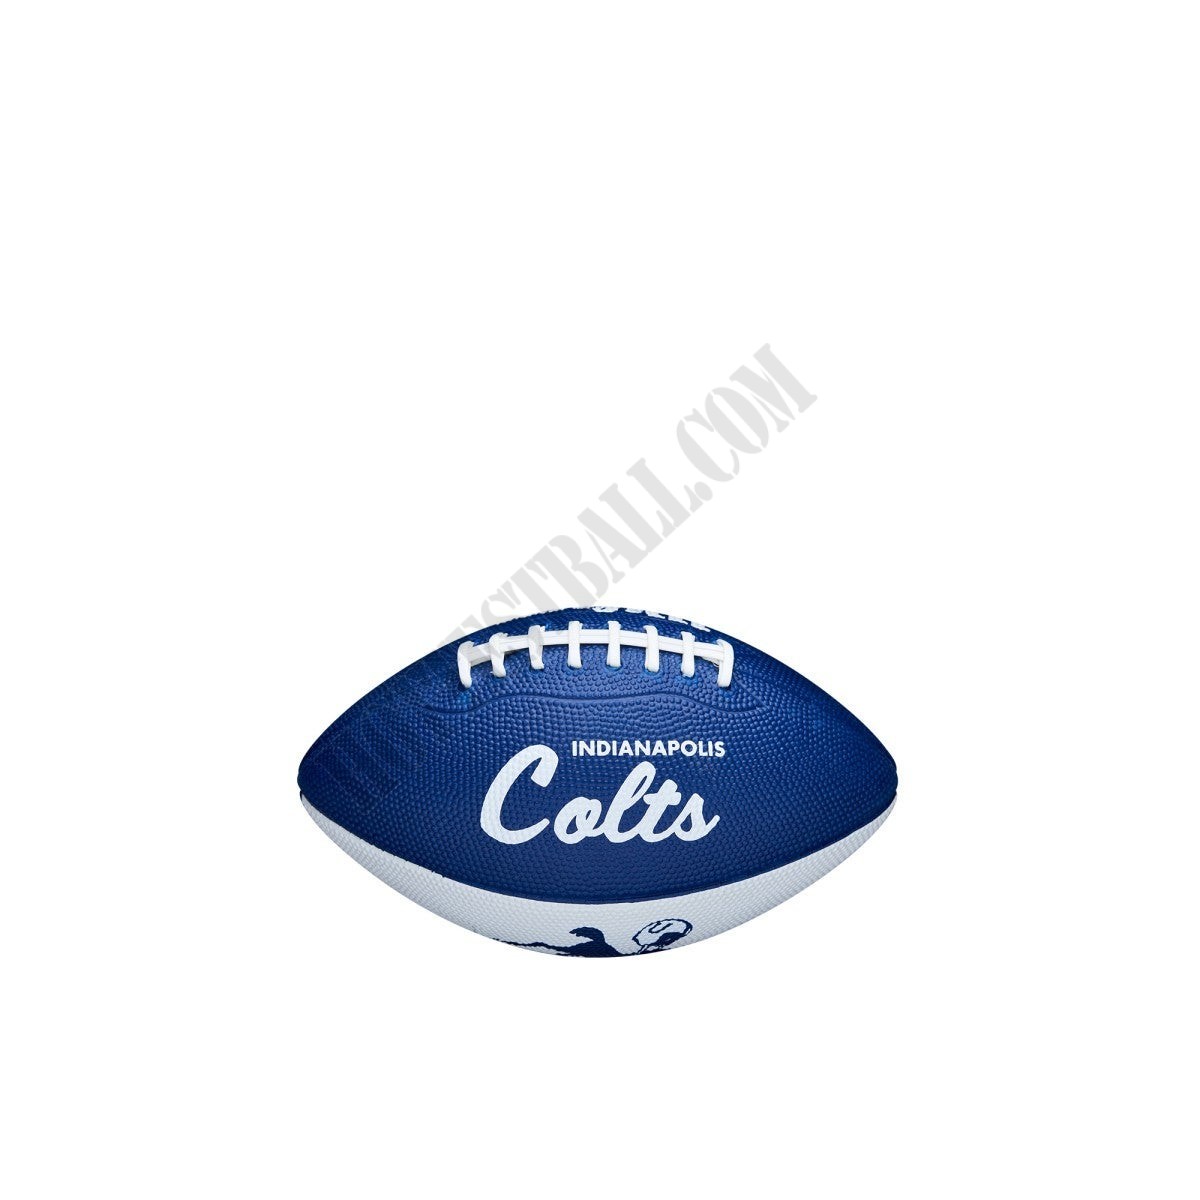 NFL Retro Mini Football - Indianapolis Colts ● Wilson Promotions - -0